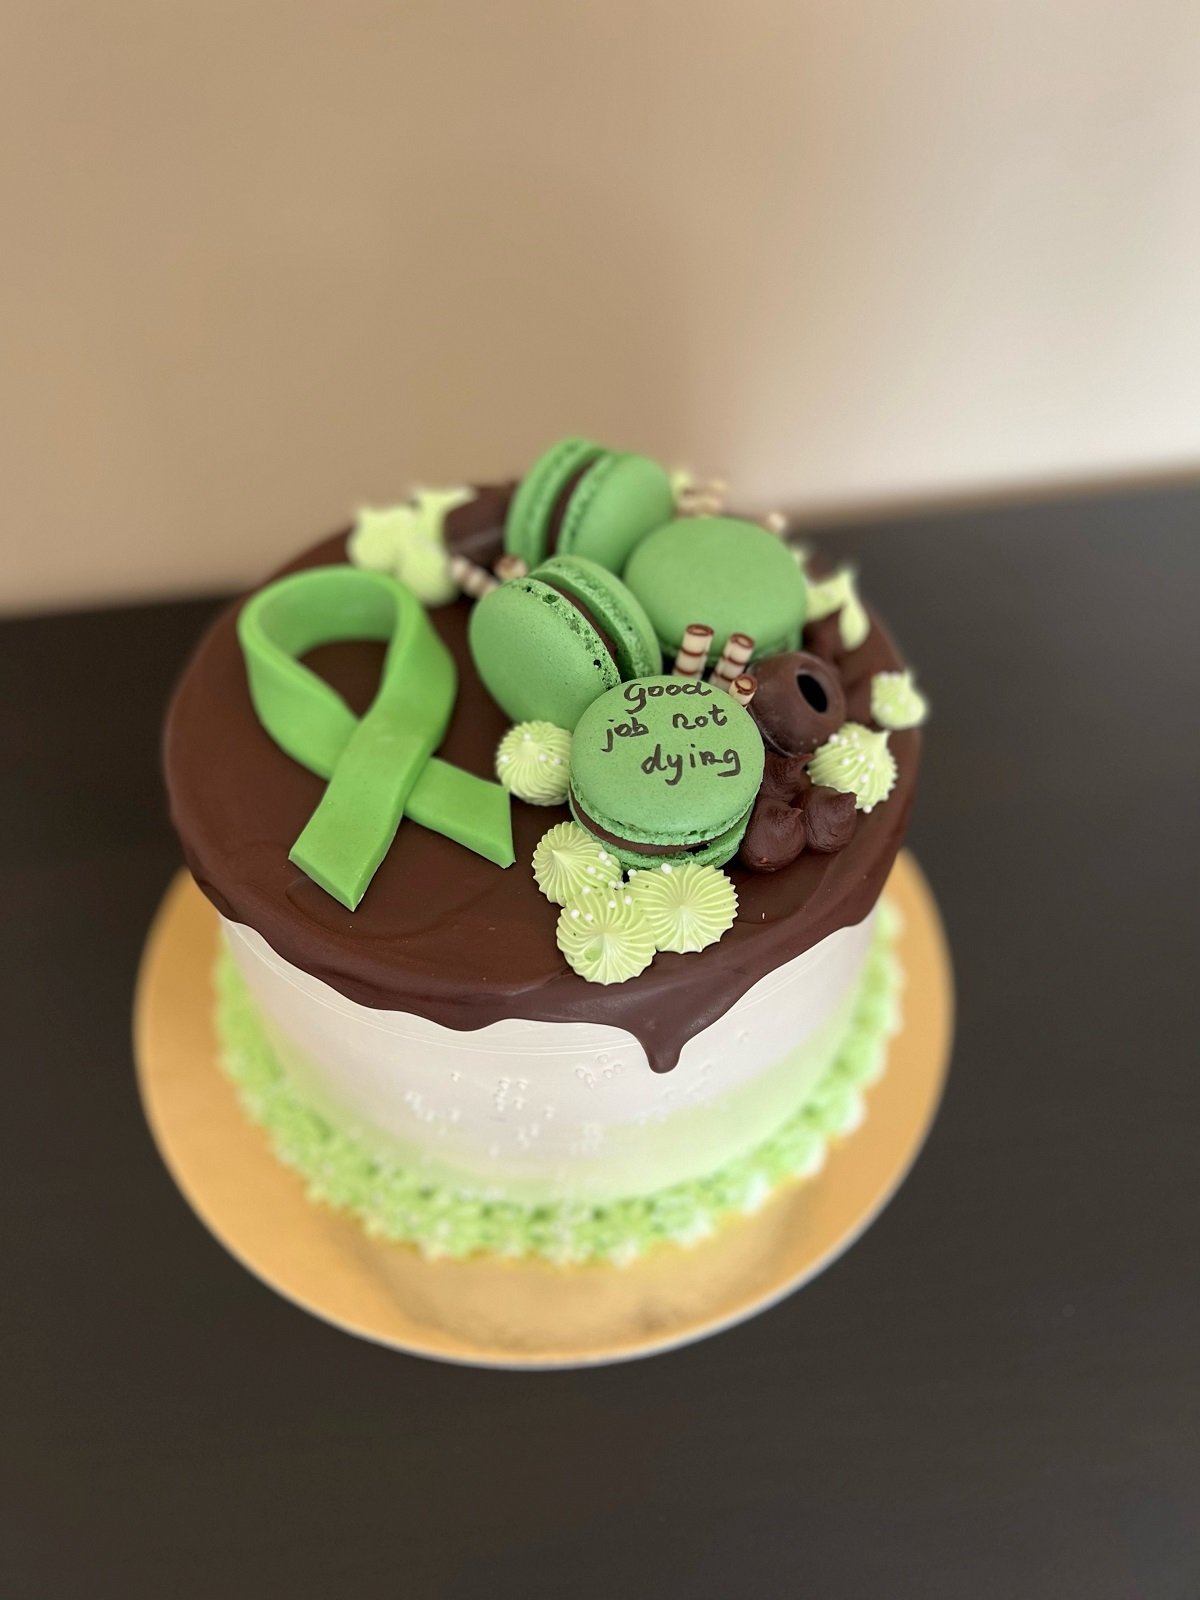 The humorous cake given to cancer survivor